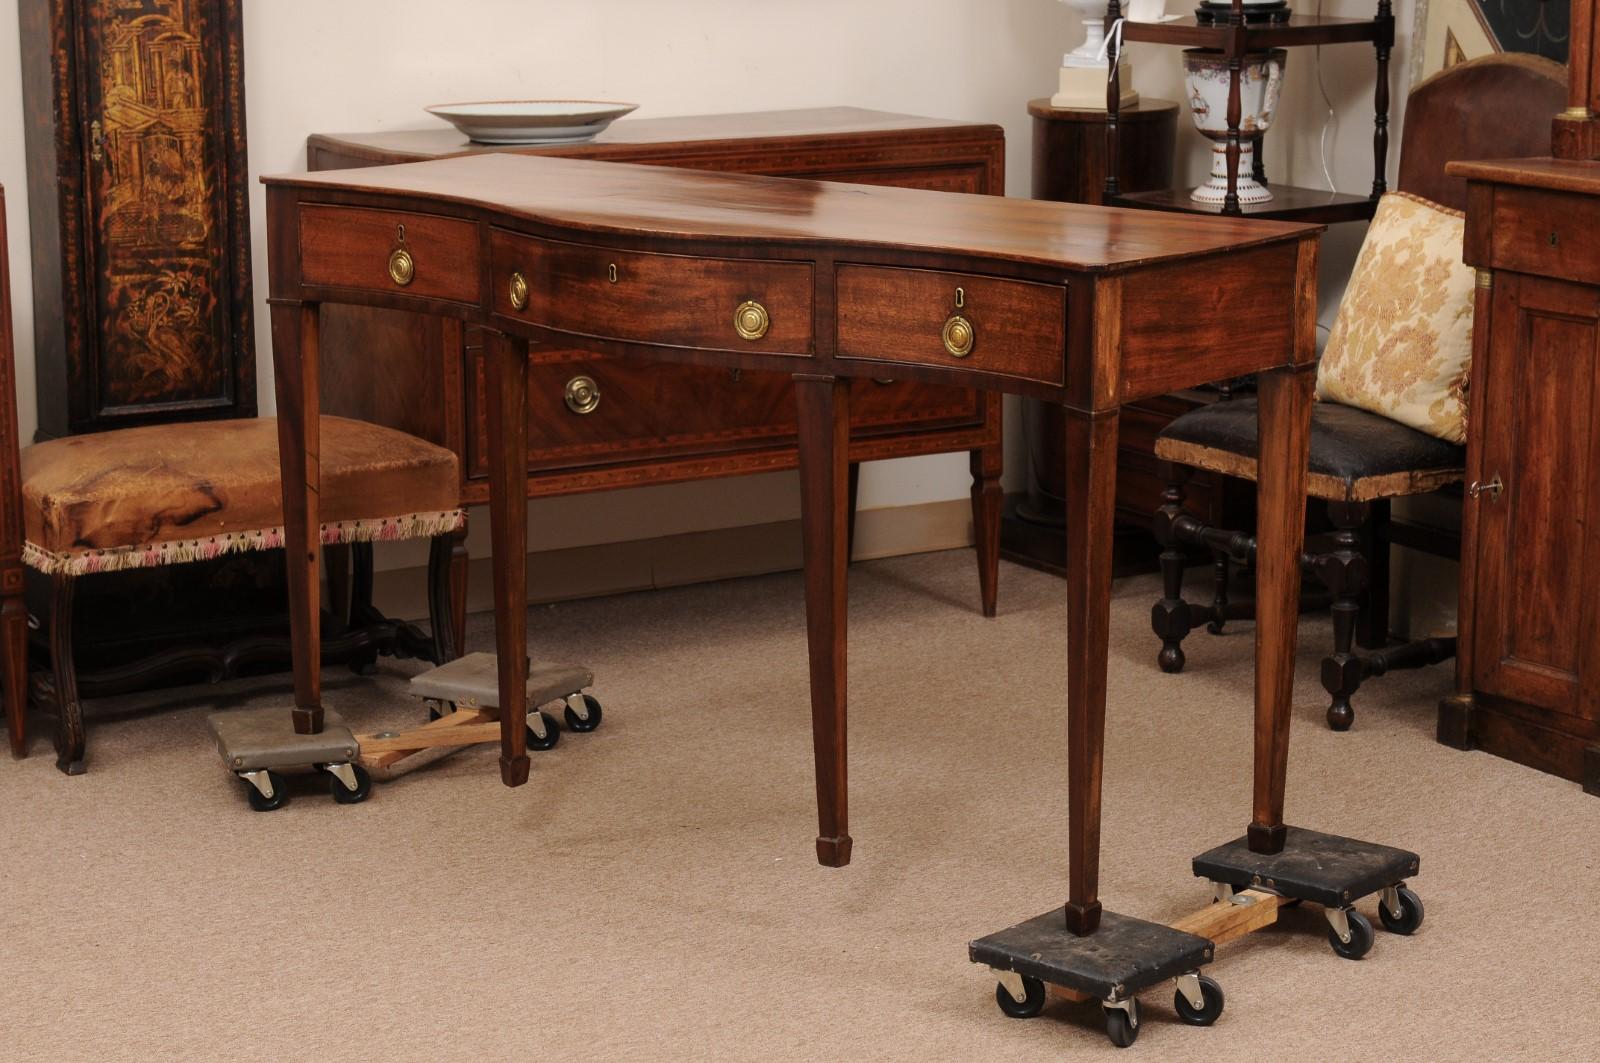 19th Century Mahogany Serving Serpentine Table with 3 Drawers For Sale 9